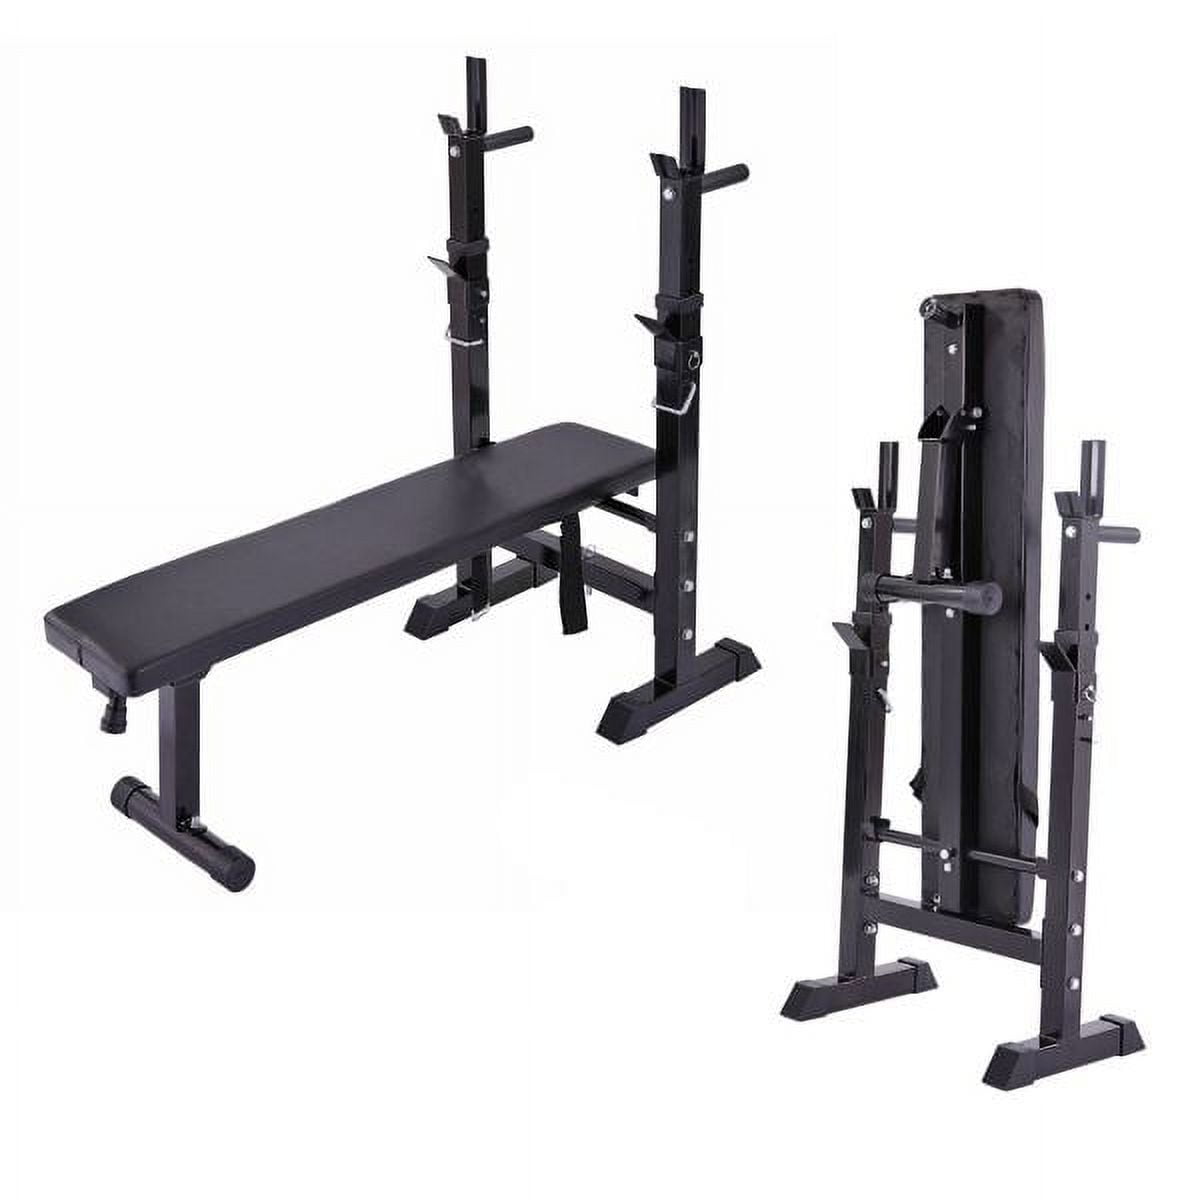 Stamina Products AeroPilates Reformer 651 Body Resistance Workout System 